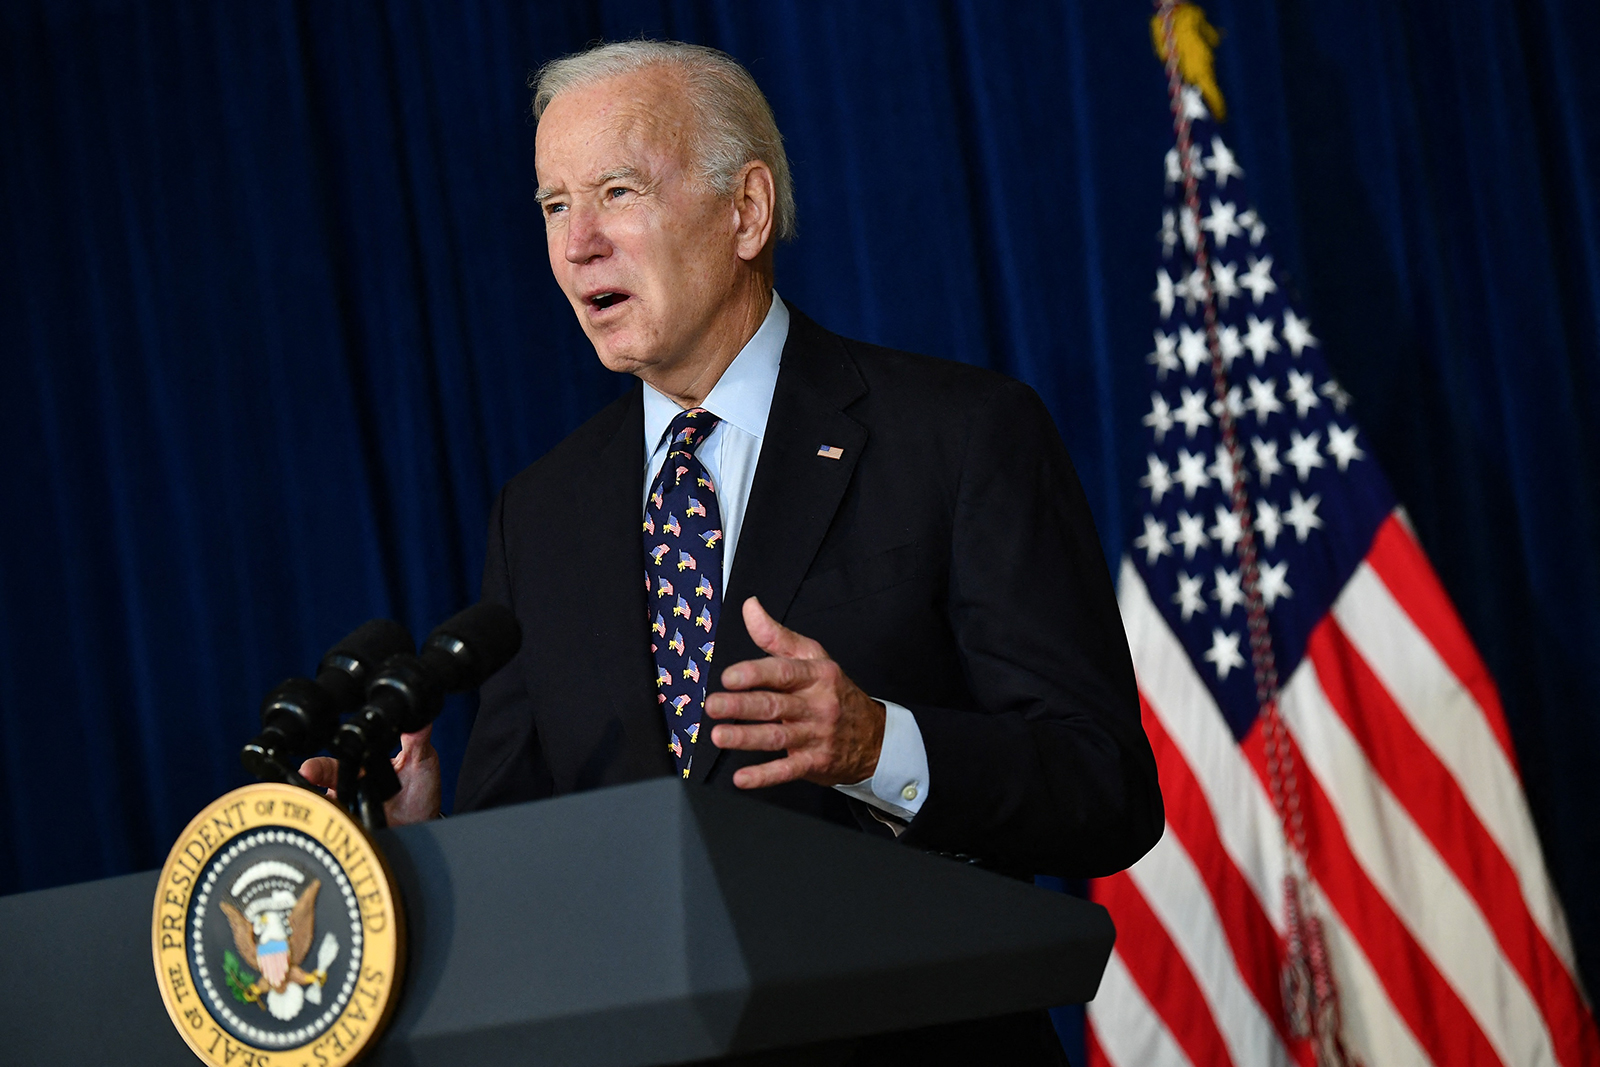 President Joe Biden speaks about the tornados which swept across the US, in Wilmington, Delaware on December 11. (Mandel Ngan/AFP/Getty Images) 